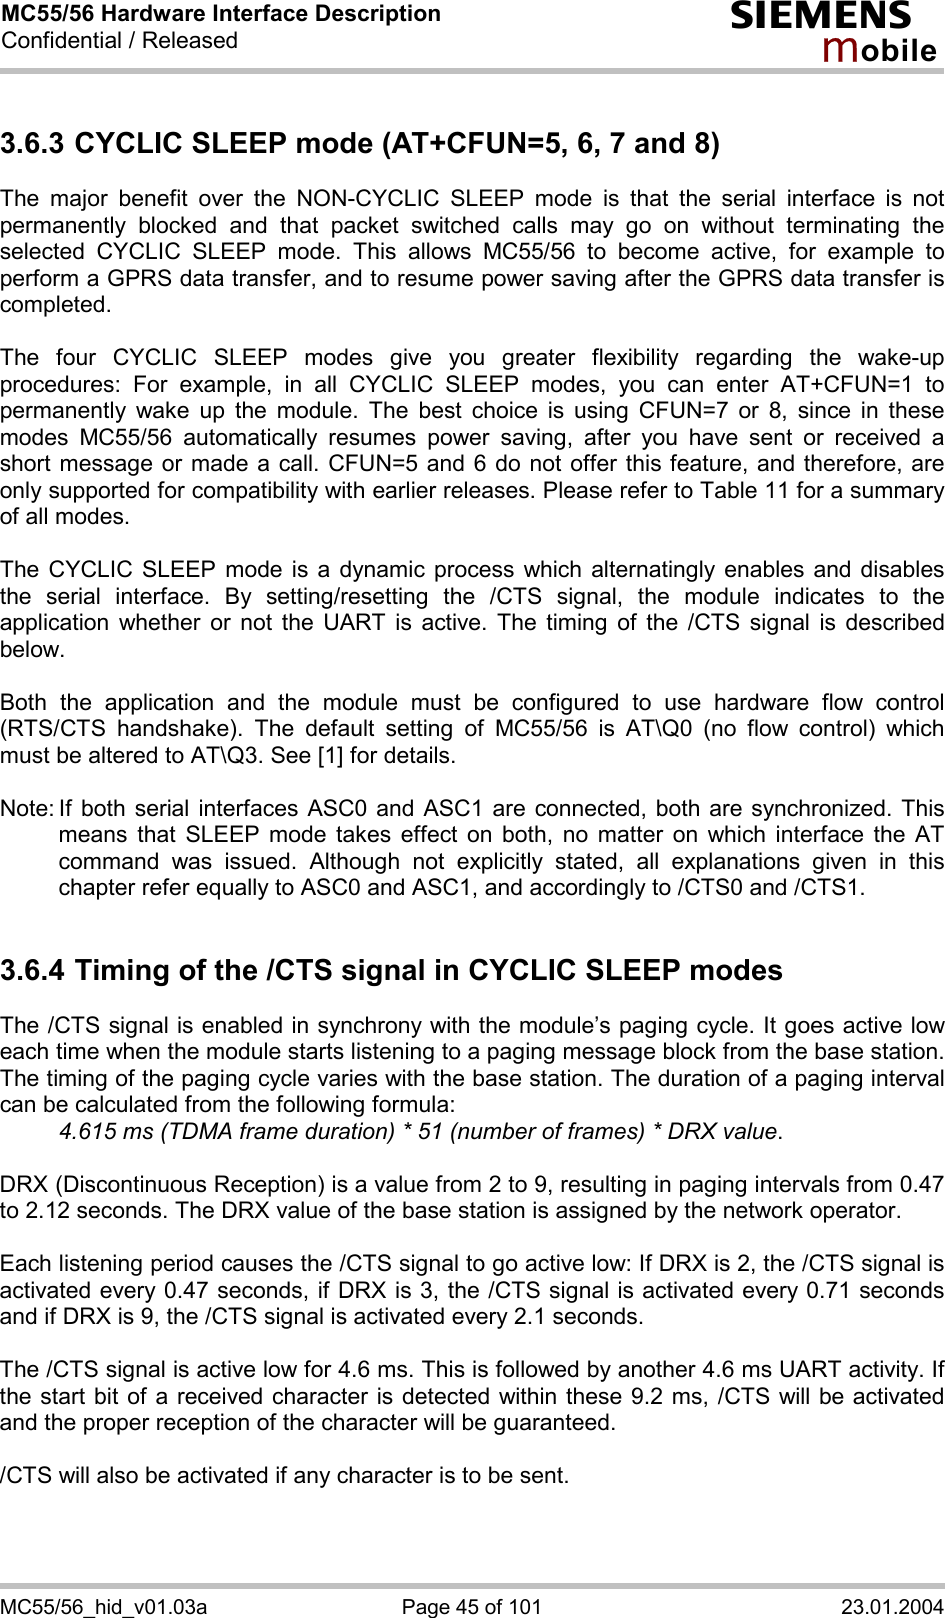 MC55/56 Hardware Interface Description Confidential / Released s mo b i l e MC55/56_hid_v01.03a  Page 45 of 101  23.01.2004 3.6.3 CYCLIC SLEEP mode (AT+CFUN=5, 6, 7 and 8) The major benefit over the NON-CYCLIC SLEEP mode is that the serial interface is not permanently blocked and that packet switched calls may go on without terminating the selected CYCLIC SLEEP mode. This allows MC55/56 to become active, for example to perform a GPRS data transfer, and to resume power saving after the GPRS data transfer is completed.  The four CYCLIC SLEEP modes give you greater flexibility regarding the wake-up procedures: For example, in all CYCLIC SLEEP modes, you can enter AT+CFUN=1 to permanently wake up the module. The best choice is using CFUN=7 or 8, since in these modes MC55/56 automatically resumes power saving, after you have sent or received a short message or made a call. CFUN=5 and 6 do not offer this feature, and therefore, are only supported for compatibility with earlier releases. Please refer to Table 11 for a summary of all modes.  The CYCLIC SLEEP mode is a dynamic process which alternatingly enables and disables the serial interface. By setting/resetting the /CTS signal, the module indicates to the application whether or not the UART is active. The timing of the /CTS signal is described below.   Both the application and the module must be configured to use hardware flow control (RTS/CTS handshake). The default setting of MC55/56 is AT\Q0 (no flow control) which must be altered to AT\Q3. See [1] for details.  Note: If both serial interfaces ASC0 and ASC1 are connected, both are synchronized. This means that SLEEP mode takes effect on both, no matter on which interface the AT command was issued. Although not explicitly stated, all explanations given in this chapter refer equally to ASC0 and ASC1, and accordingly to /CTS0 and /CTS1.   3.6.4 Timing of the /CTS signal in CYCLIC SLEEP modes The /CTS signal is enabled in synchrony with the module’s paging cycle. It goes active low each time when the module starts listening to a paging message block from the base station. The timing of the paging cycle varies with the base station. The duration of a paging interval can be calculated from the following formula:  4.615 ms (TDMA frame duration) * 51 (number of frames) * DRX value.   DRX (Discontinuous Reception) is a value from 2 to 9, resulting in paging intervals from 0.47 to 2.12 seconds. The DRX value of the base station is assigned by the network operator.   Each listening period causes the /CTS signal to go active low: If DRX is 2, the /CTS signal is activated every 0.47 seconds, if DRX is 3, the /CTS signal is activated every 0.71 seconds and if DRX is 9, the /CTS signal is activated every 2.1 seconds.  The /CTS signal is active low for 4.6 ms. This is followed by another 4.6 ms UART activity. If the start bit of a received character is detected within these 9.2 ms, /CTS will be activated and the proper reception of the character will be guaranteed.   /CTS will also be activated if any character is to be sent.  